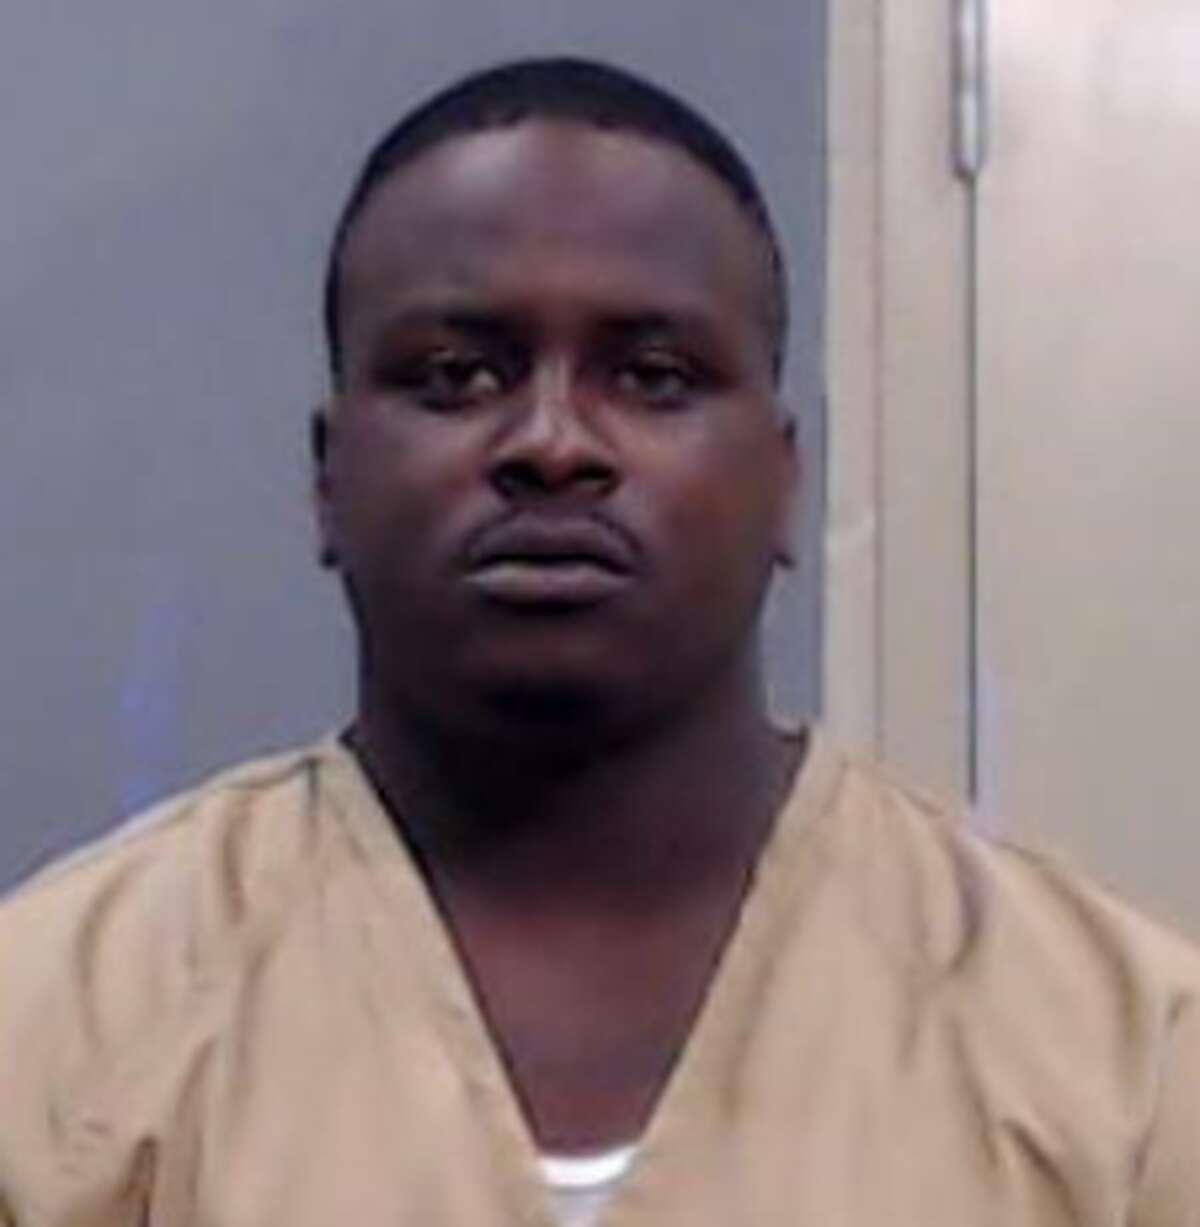 Dairus Russell, 29, of Houston was arrested in connection with Odessa "bank jugging" incidents. 